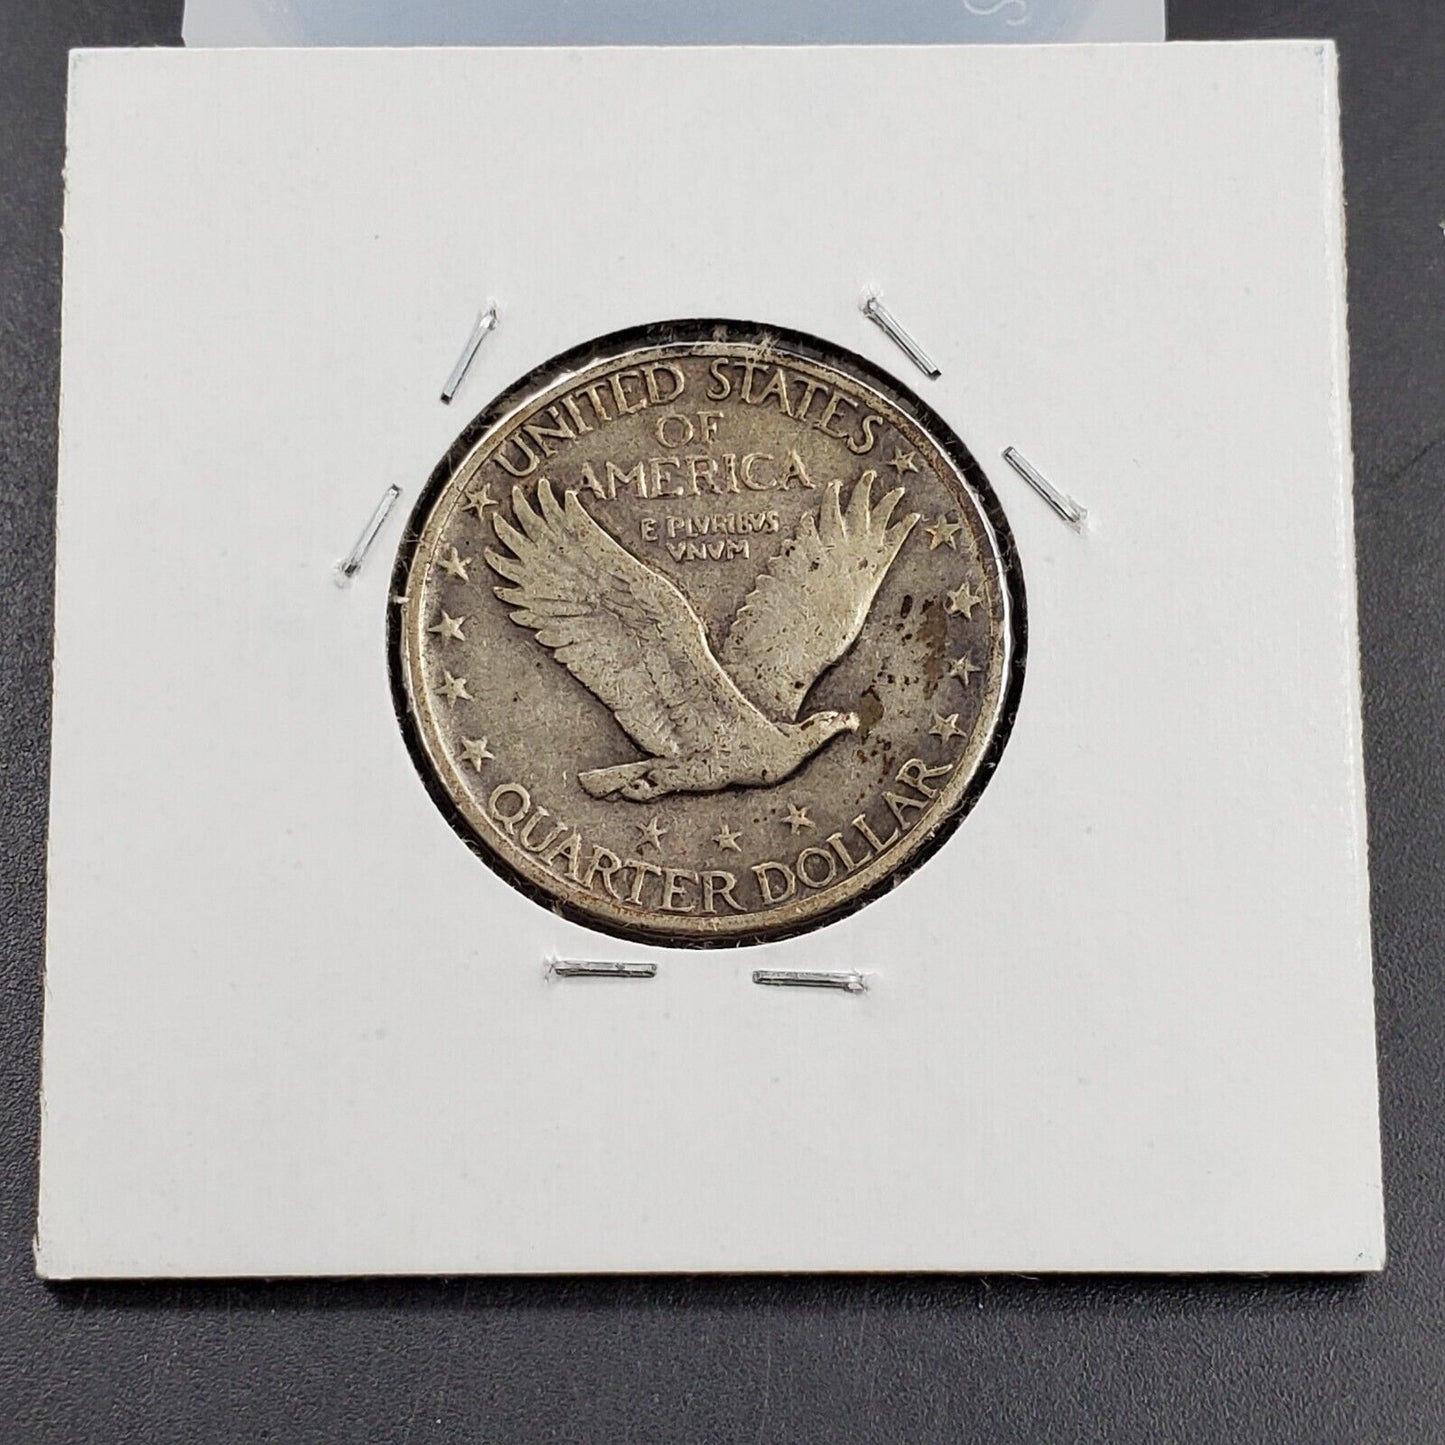 1928 S 25c Standing Liberty Quarter Coin Choice VG / Fine FS-501 Variety